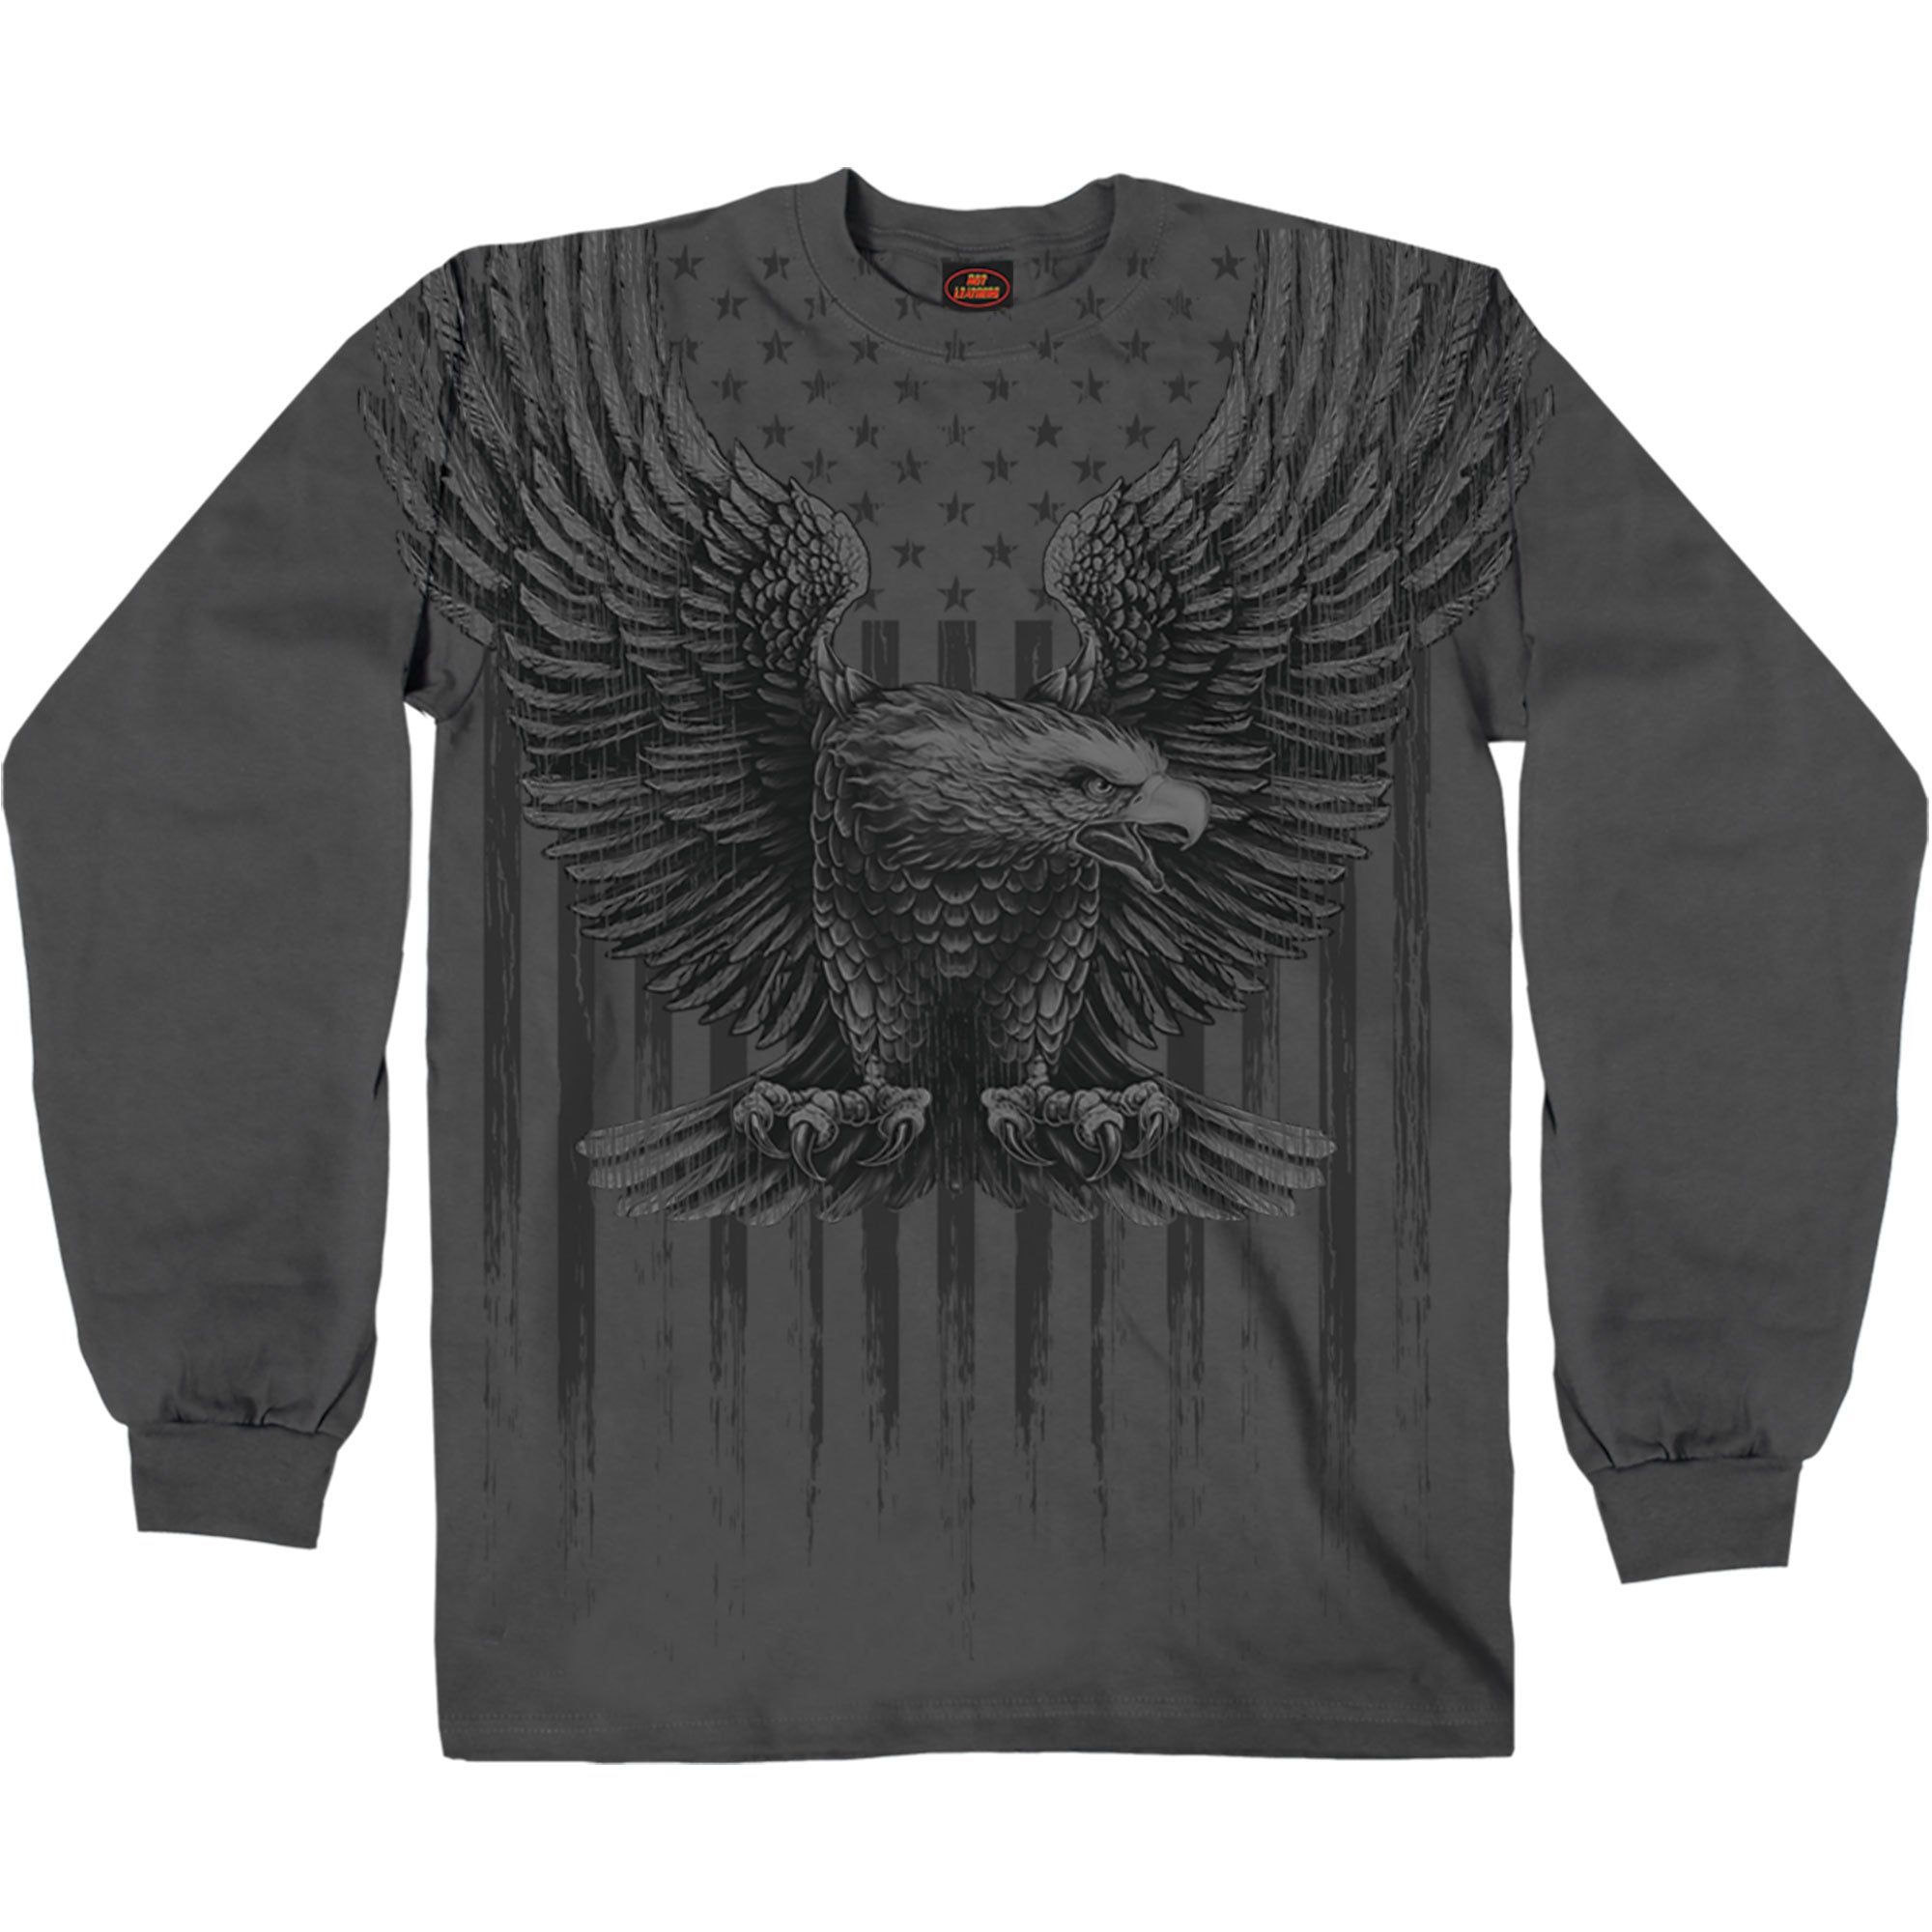 Hot Leathers GMS2524 Men's Charcoal Up-Wing Eagle Long Sleeve T-Shirt